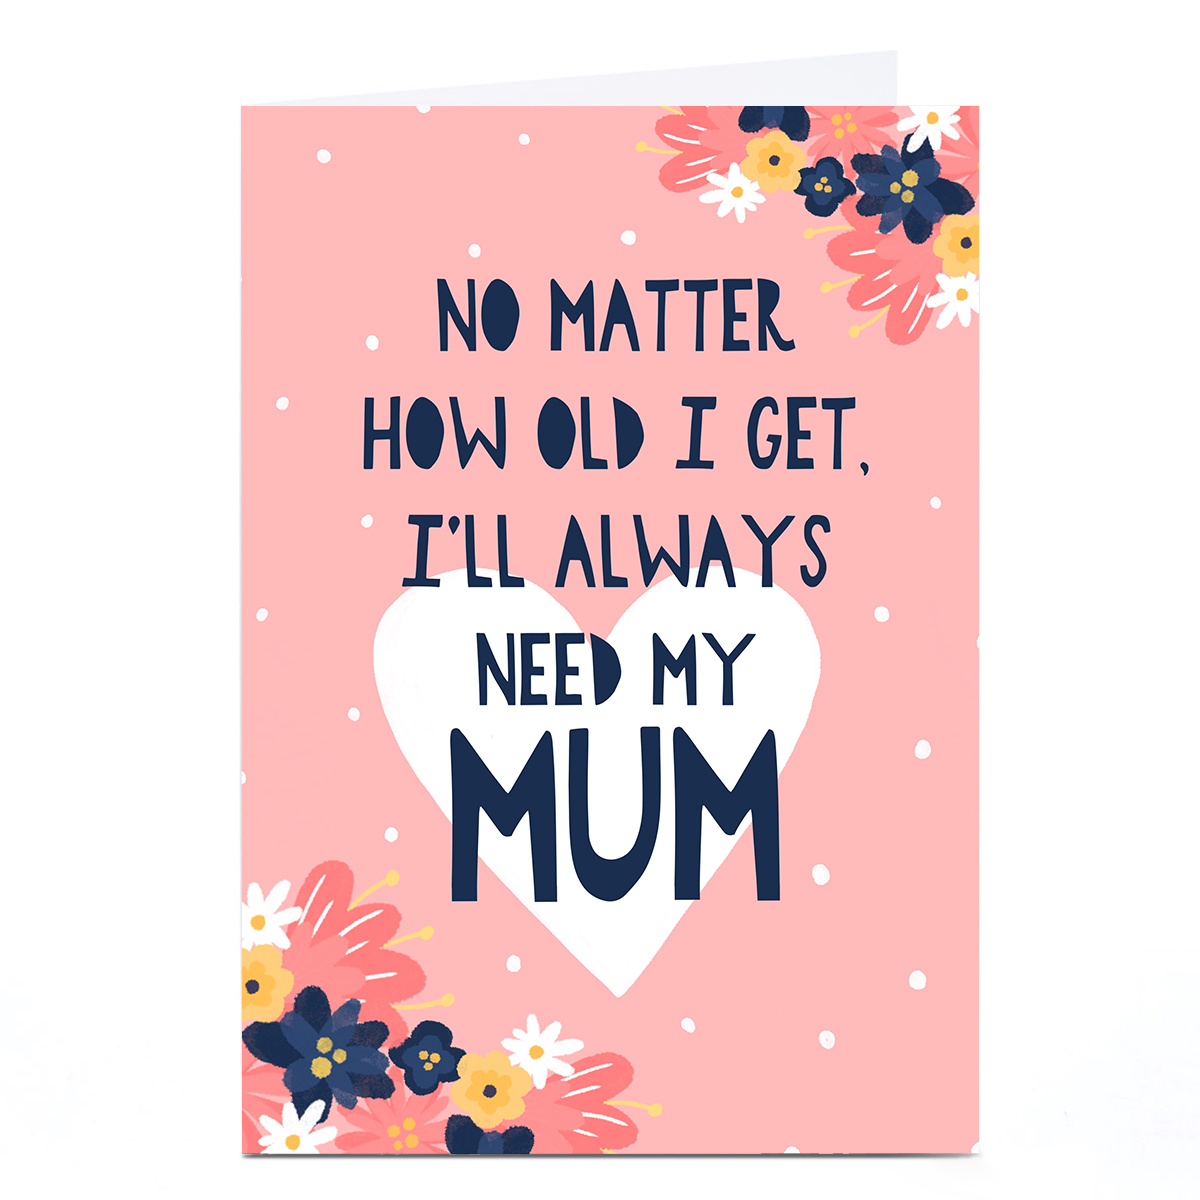 Personalised Phoebe Munger Mother's Day Card - No Matter How Old